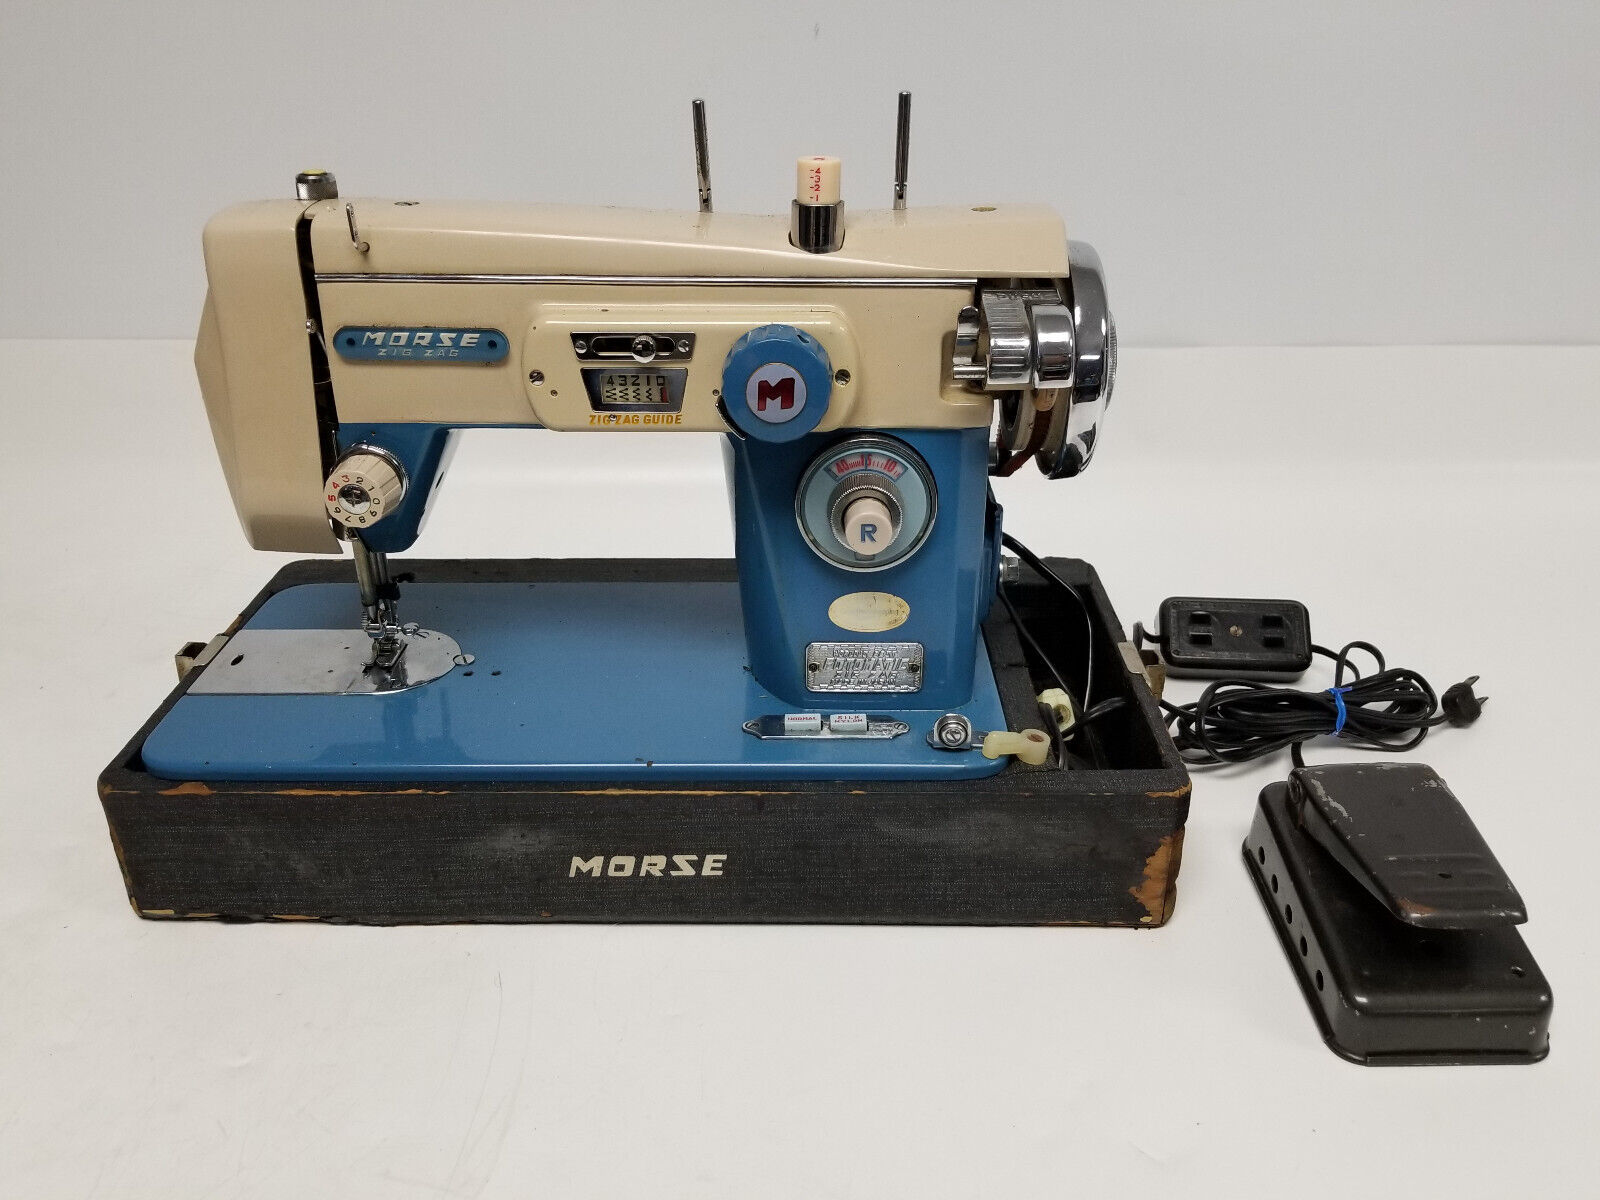 Vintage Morse Fotomatic 4100 Zig Zag Sewing Machine with Pedal (Powers On)